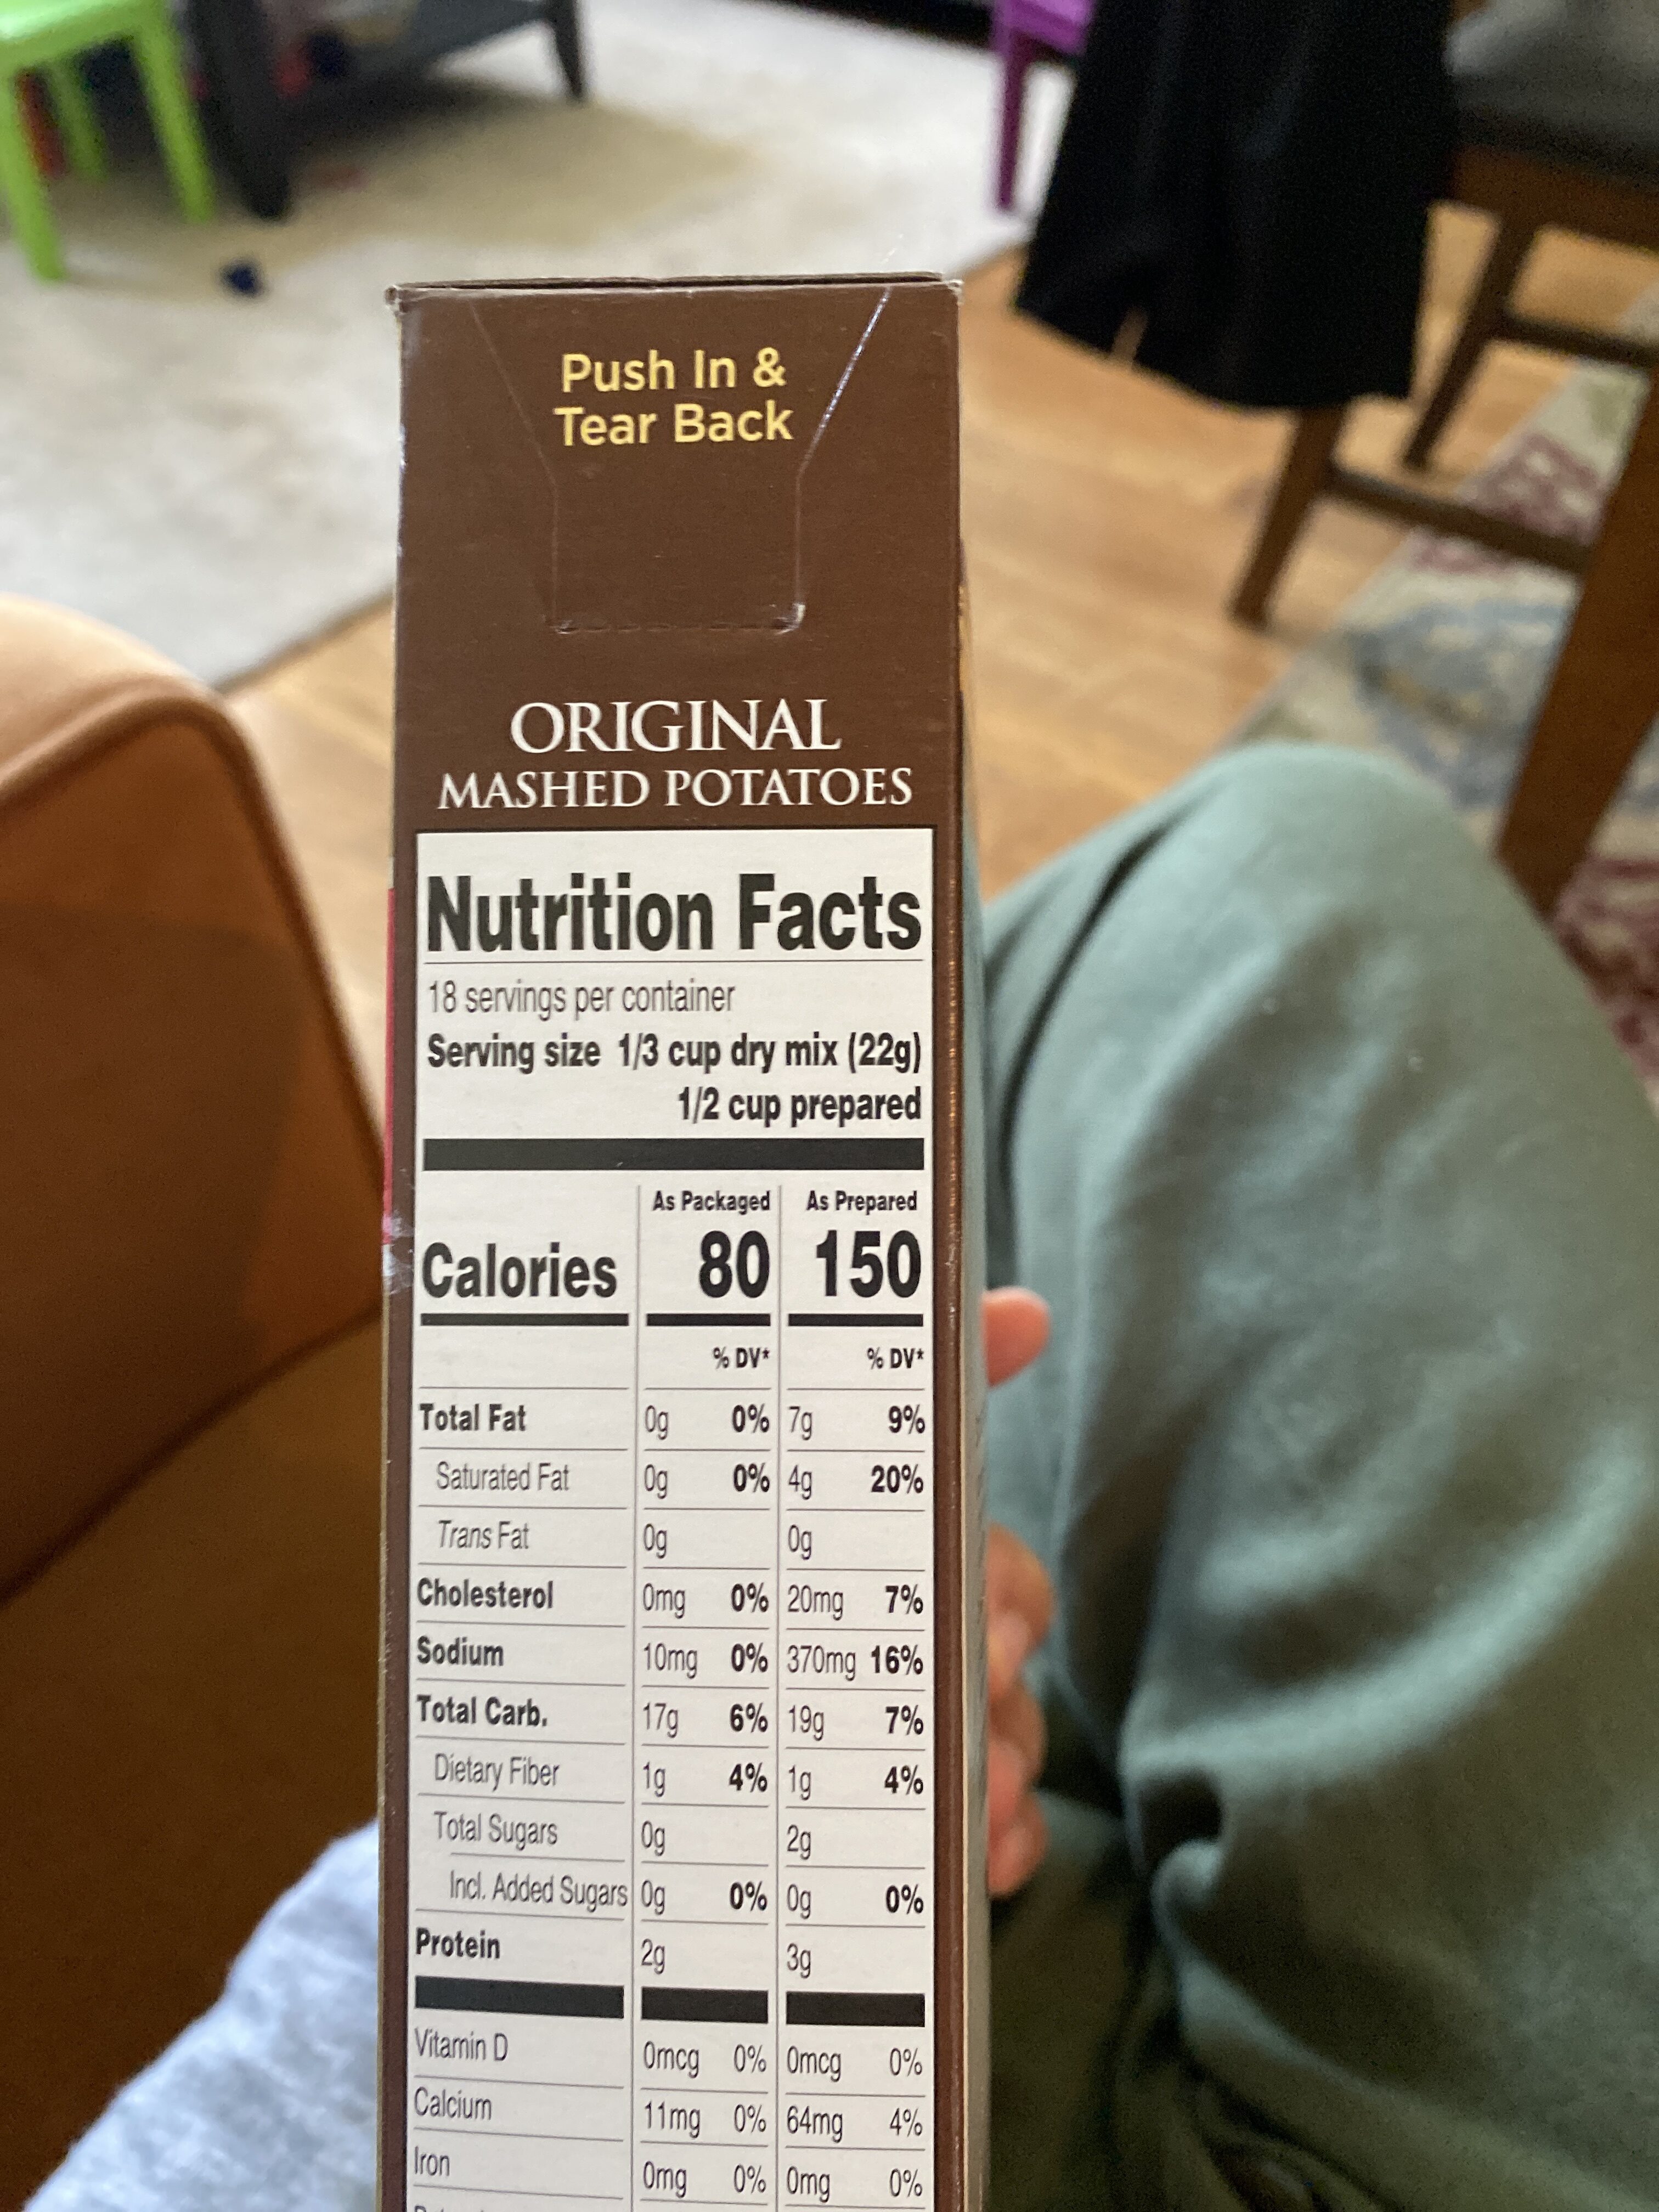 Original mashed potatoes - Nutrition facts